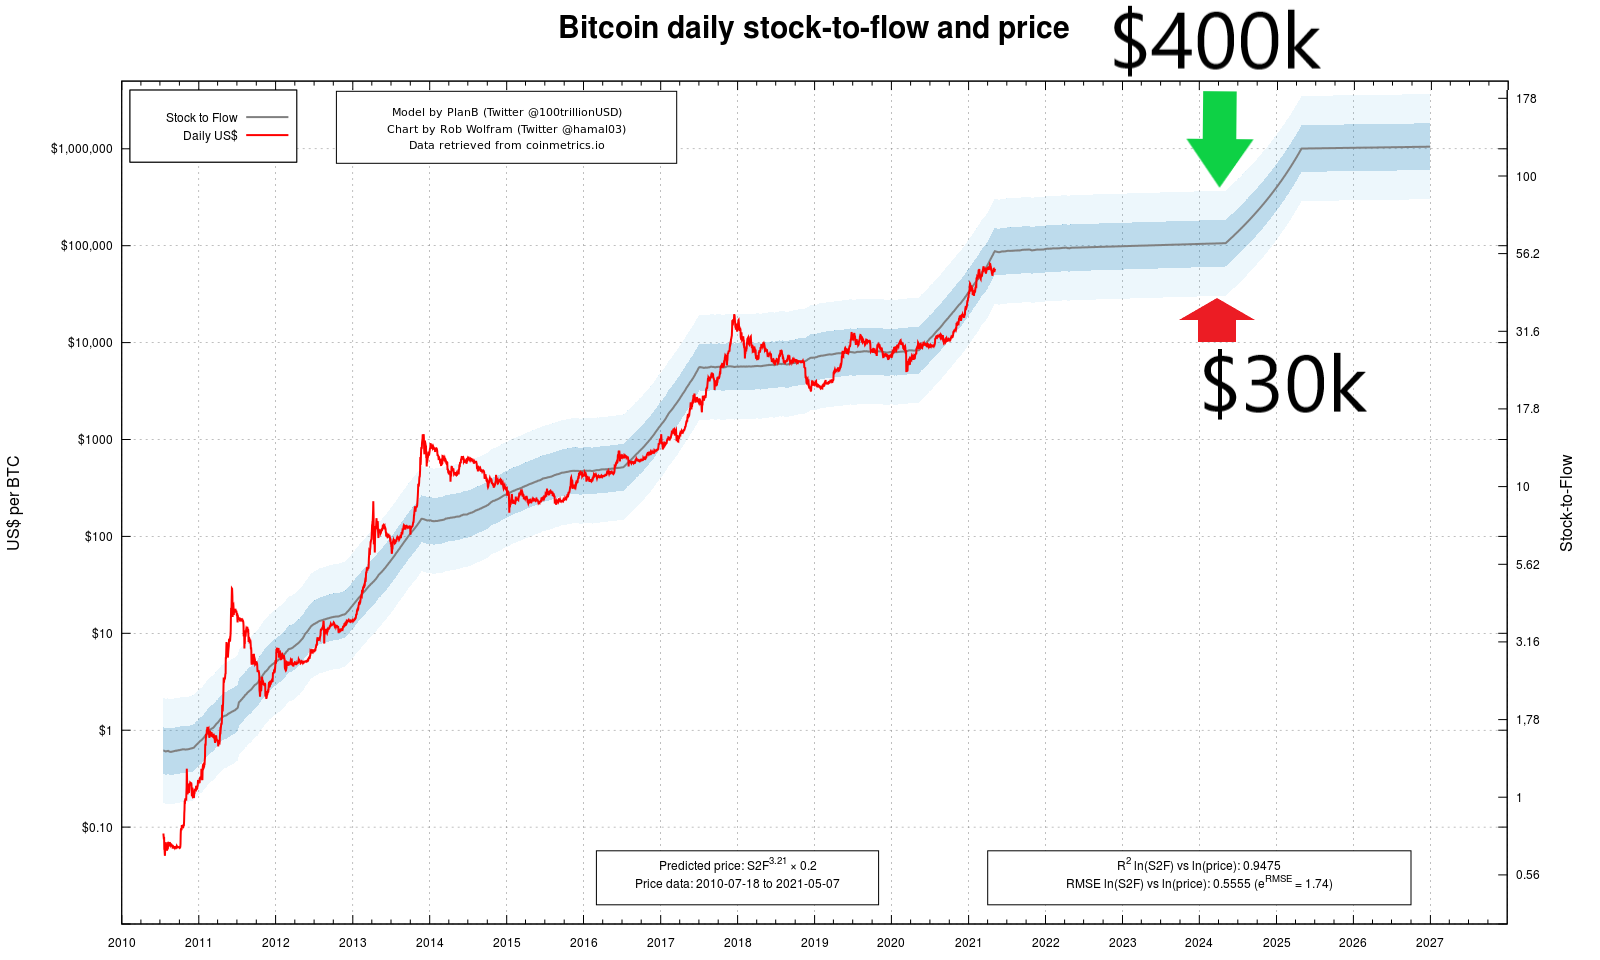 Bitcoin's stock-to-flow chart price range is broad and wide